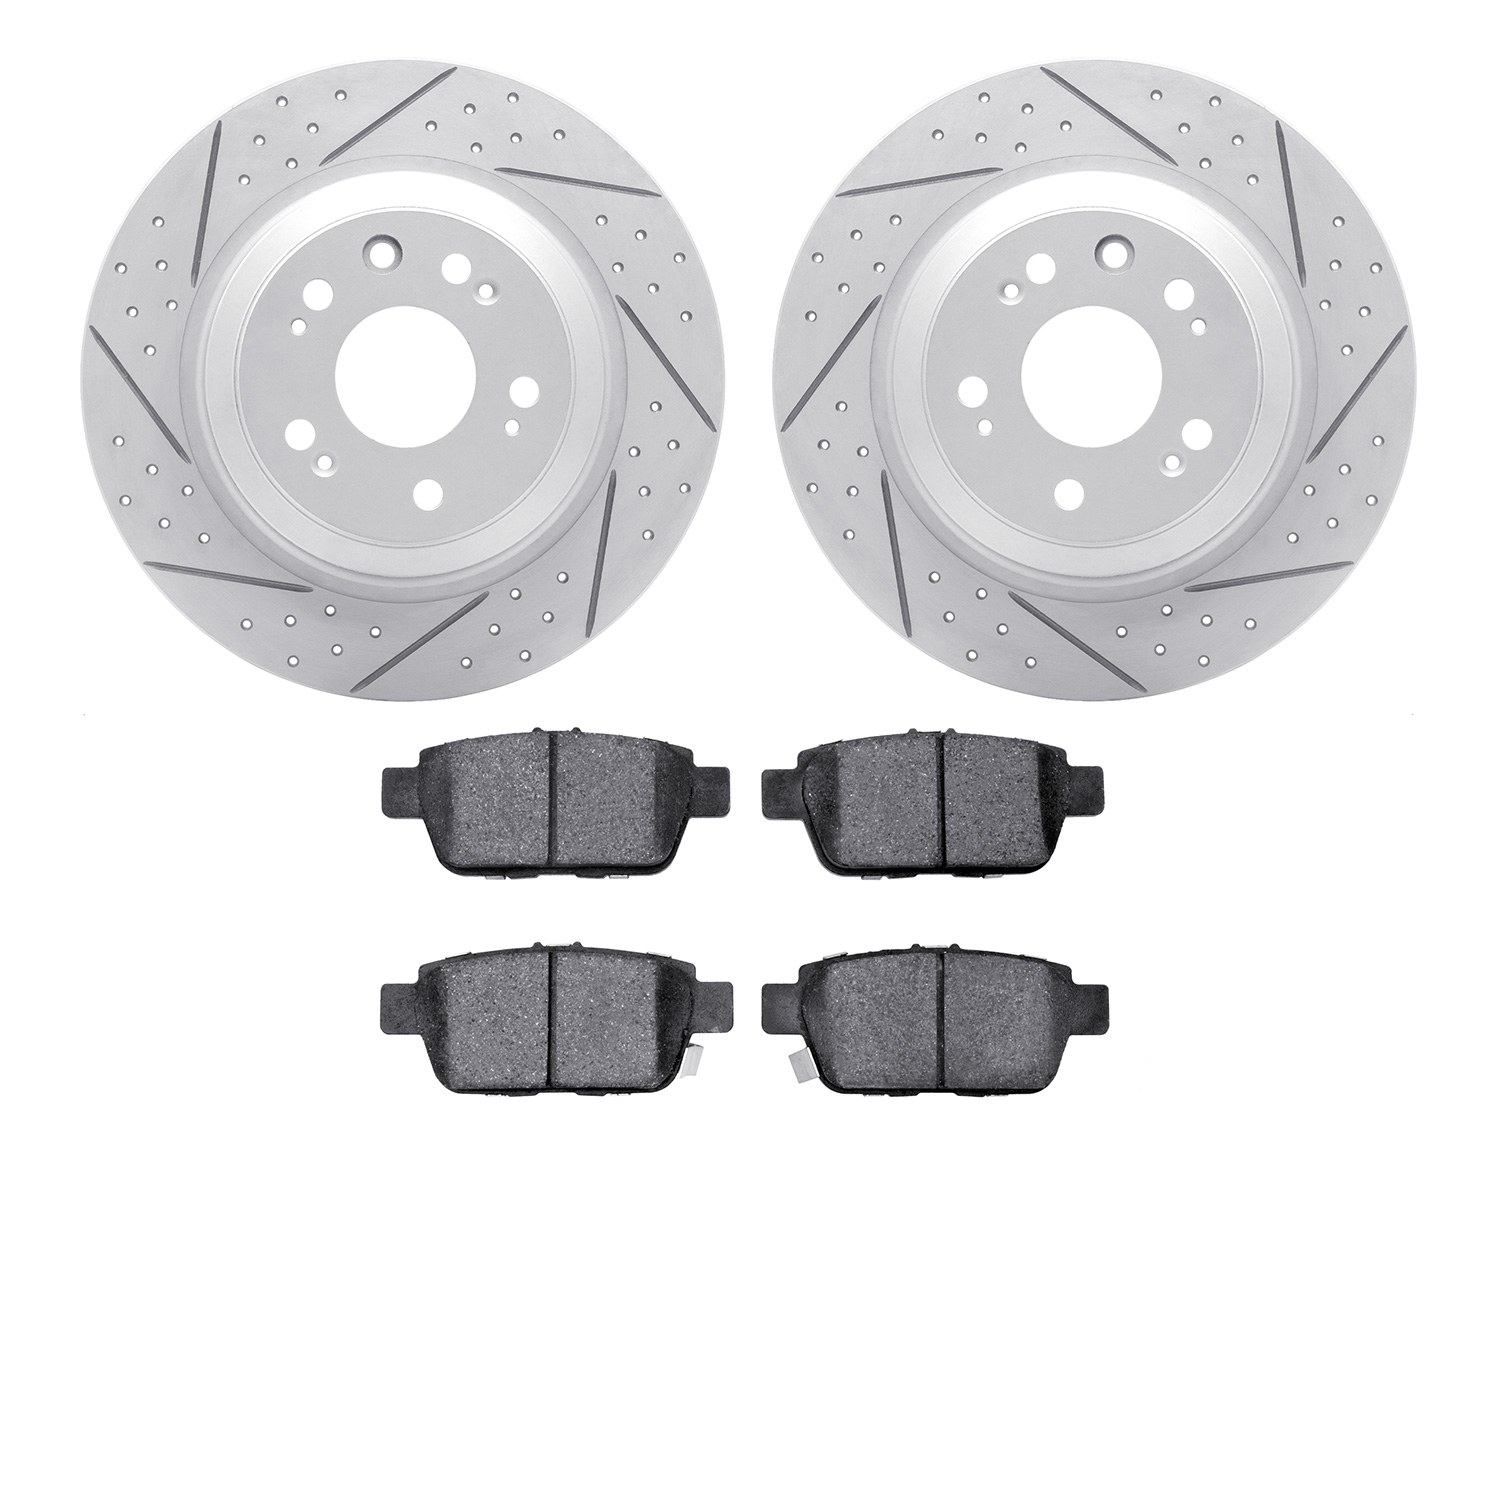 2502-58018 Geoperformance Drilled/Slotted Rotors w/5000 Advanced Brake Pads Kit, 2009-2014 Acura/Honda, Position: Rear